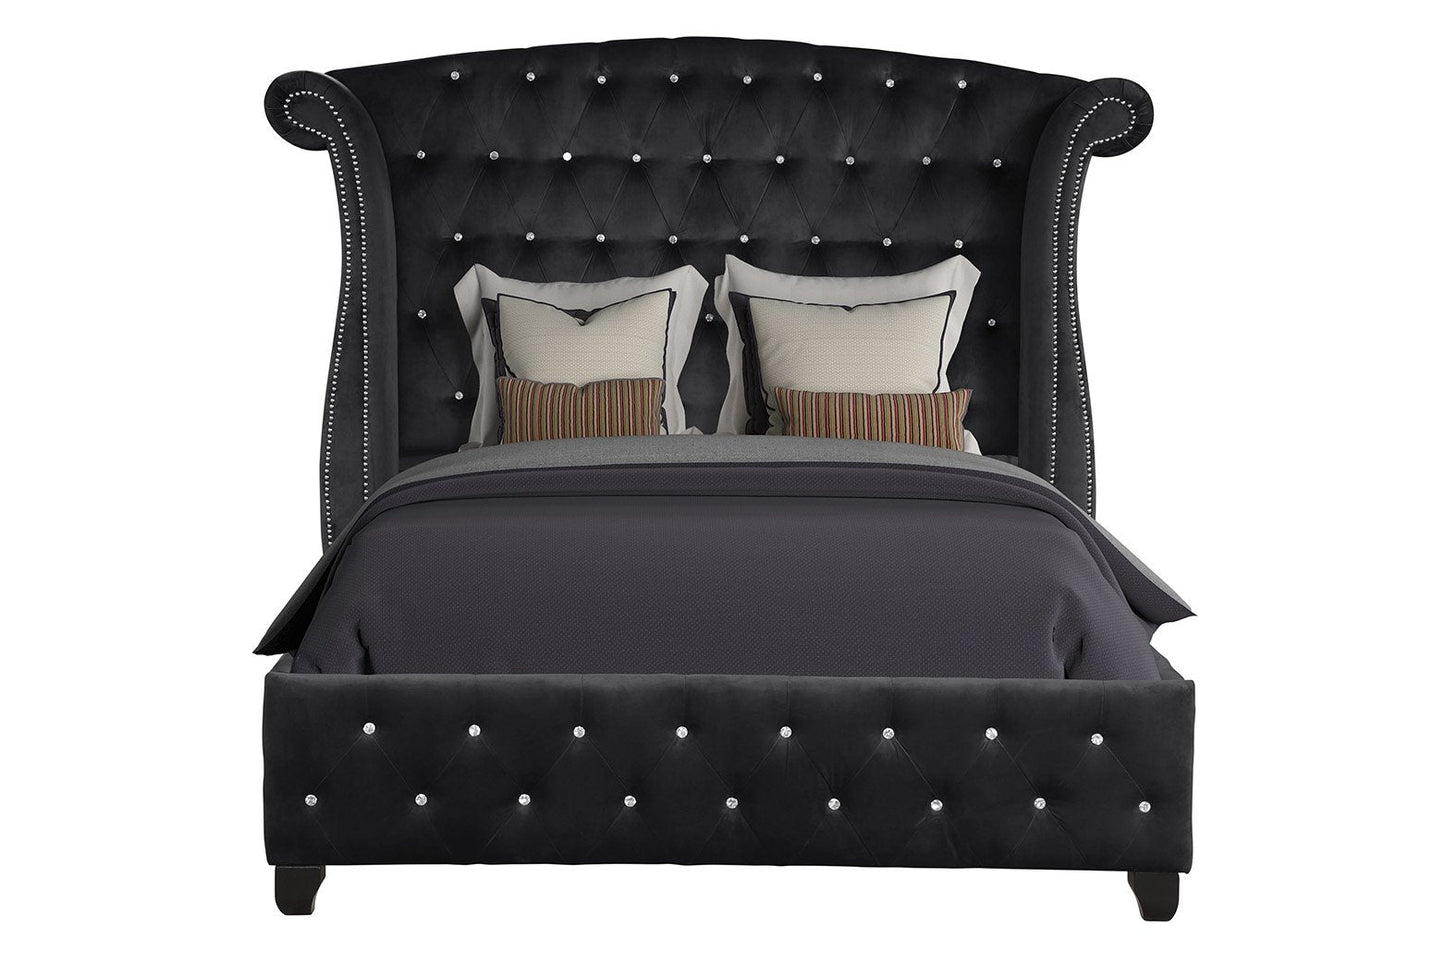 Galaxy Home Sophia Upholstery King Size Bed Made with Wood Black Wood